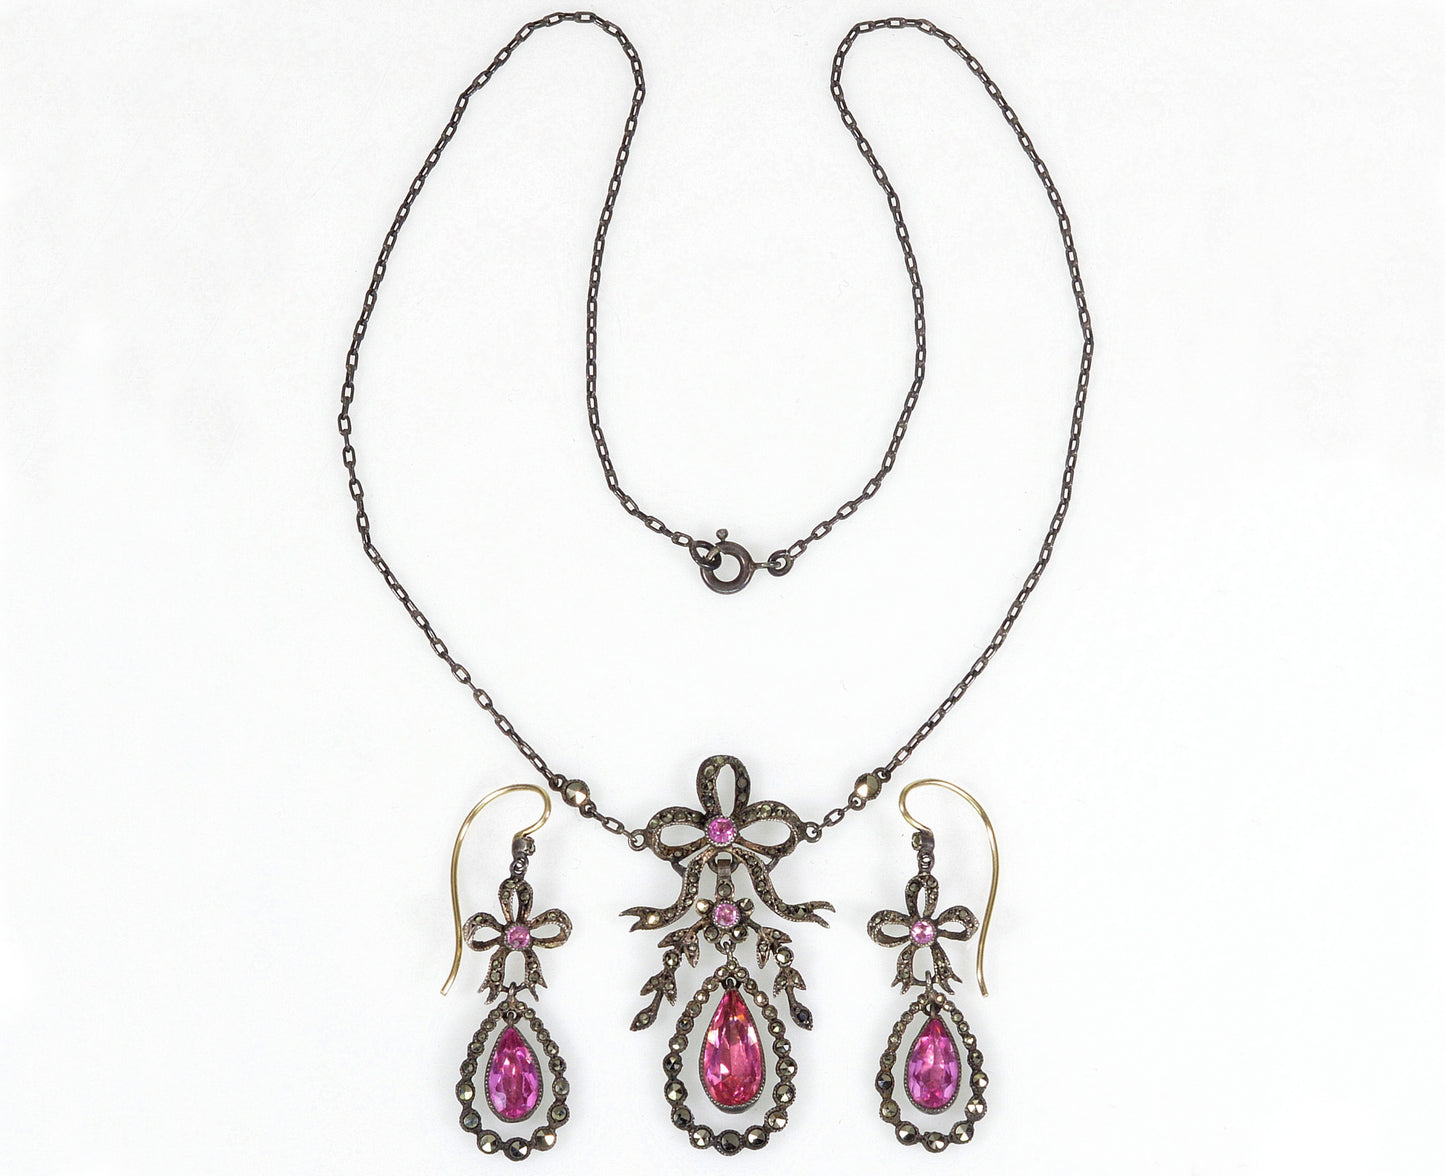 Reserved for D.T. Antique Georgian Bow Earrings Necklace Set Paste Marcasite Sterling C.1820